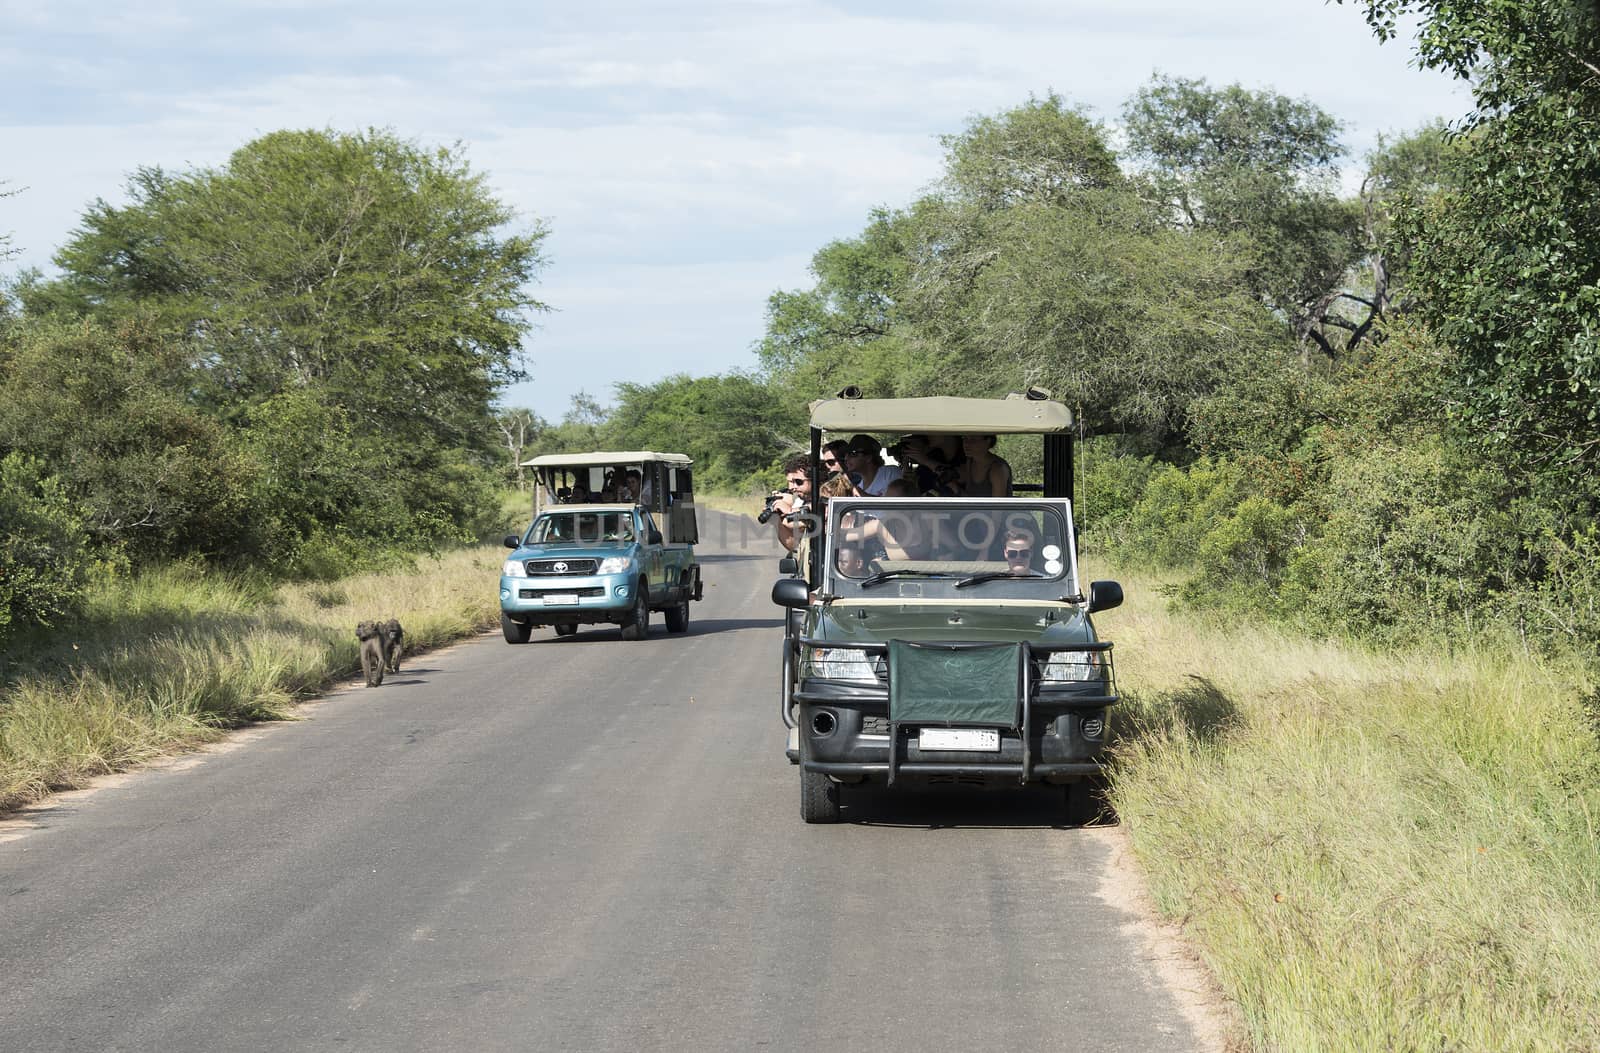 people on safari in kruger national park by compuinfoto